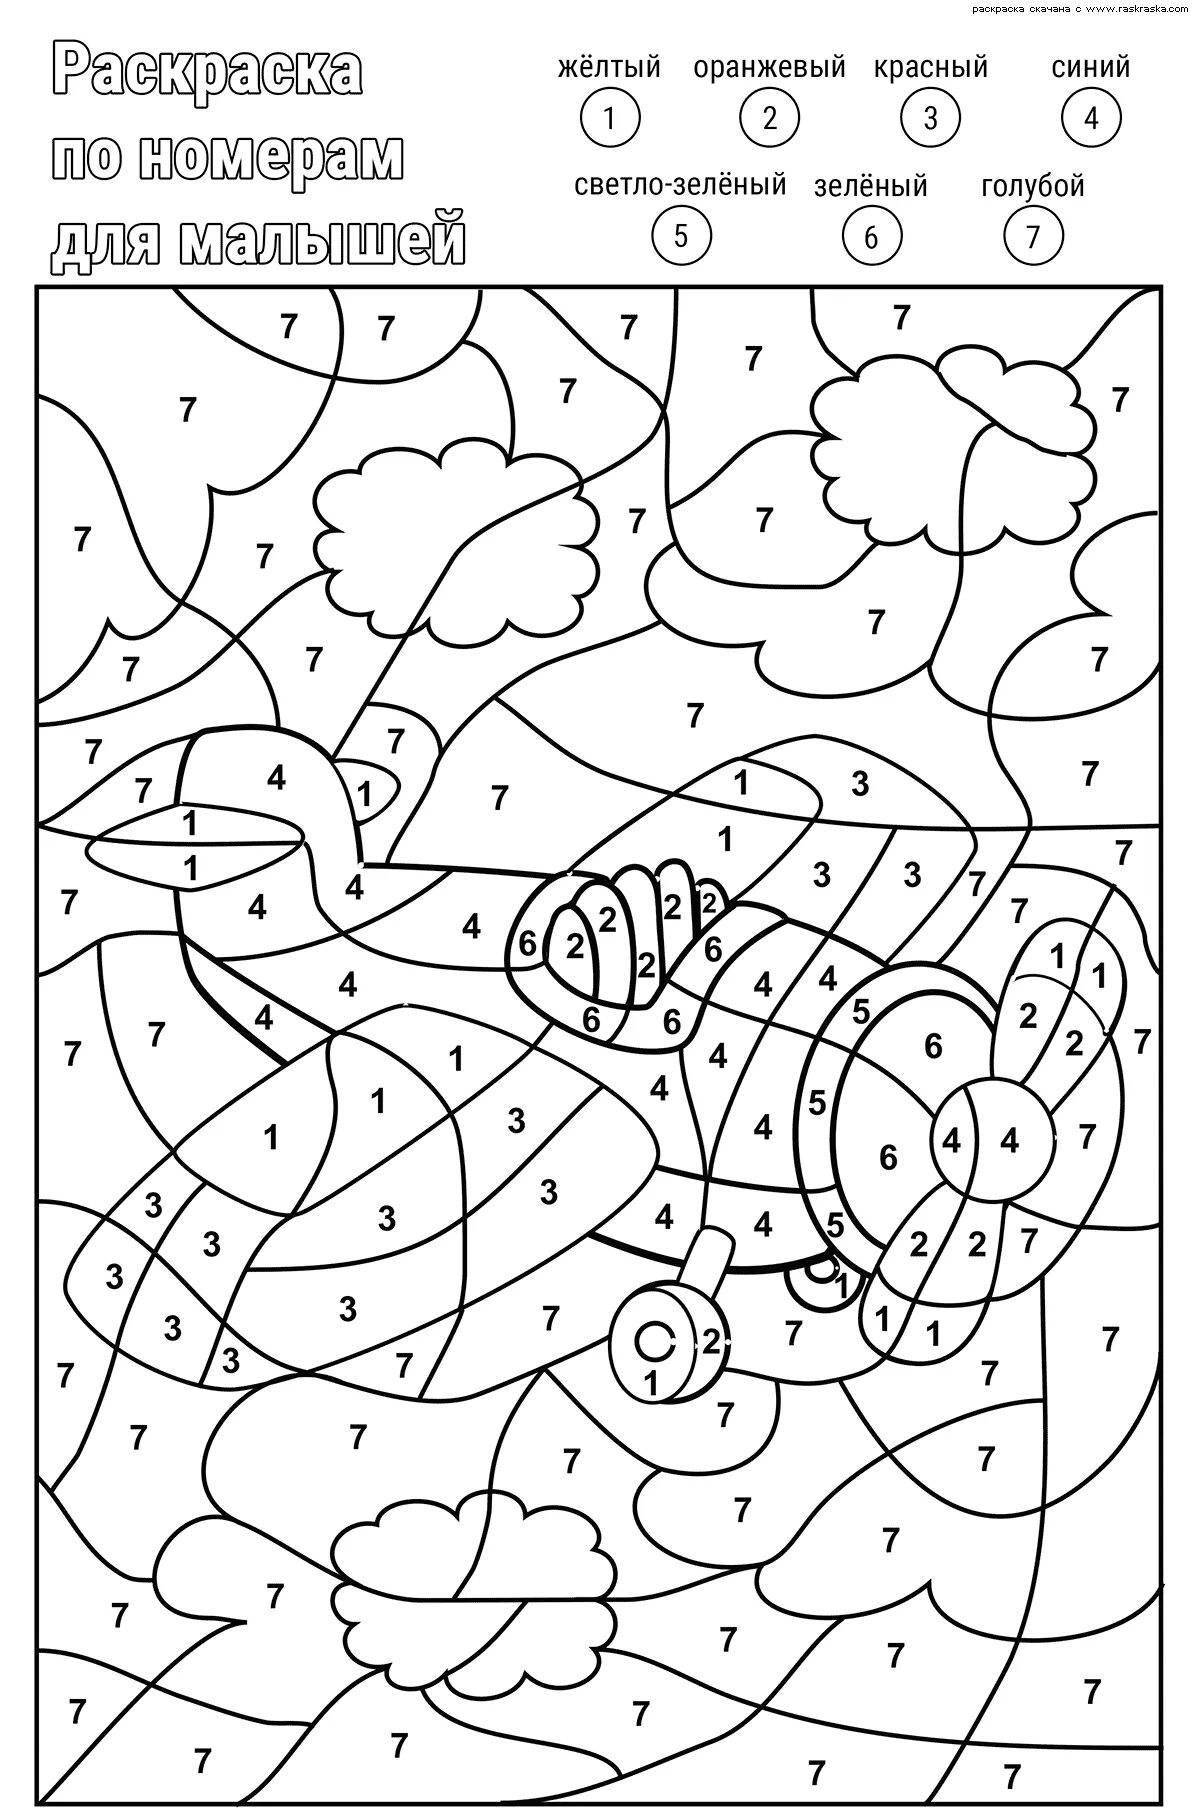 Fun coloring by numbers without Internet